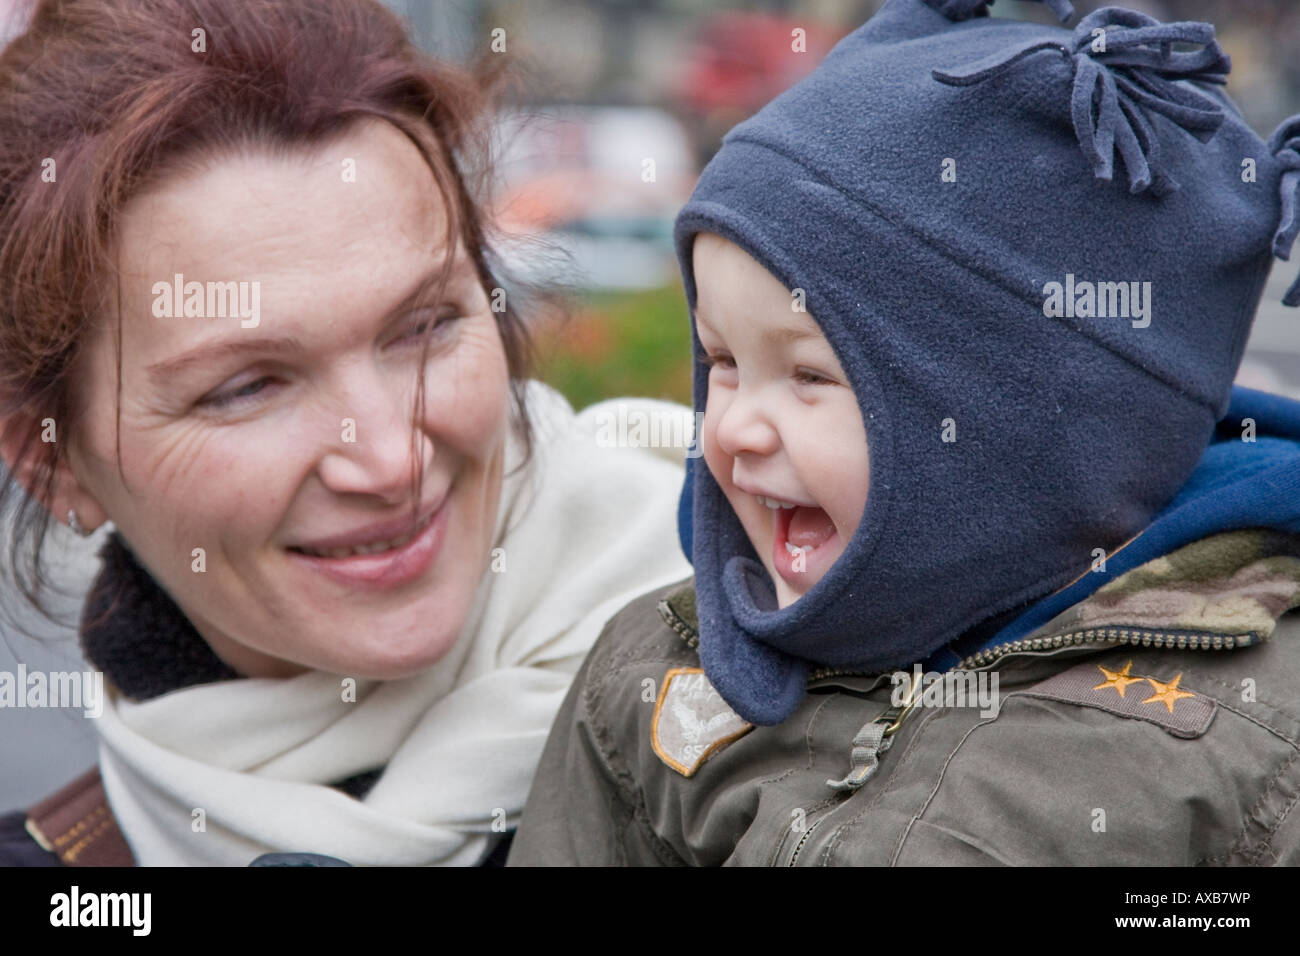 Middle aged Woman holding an 1 fois smiling boy Banque D'Images